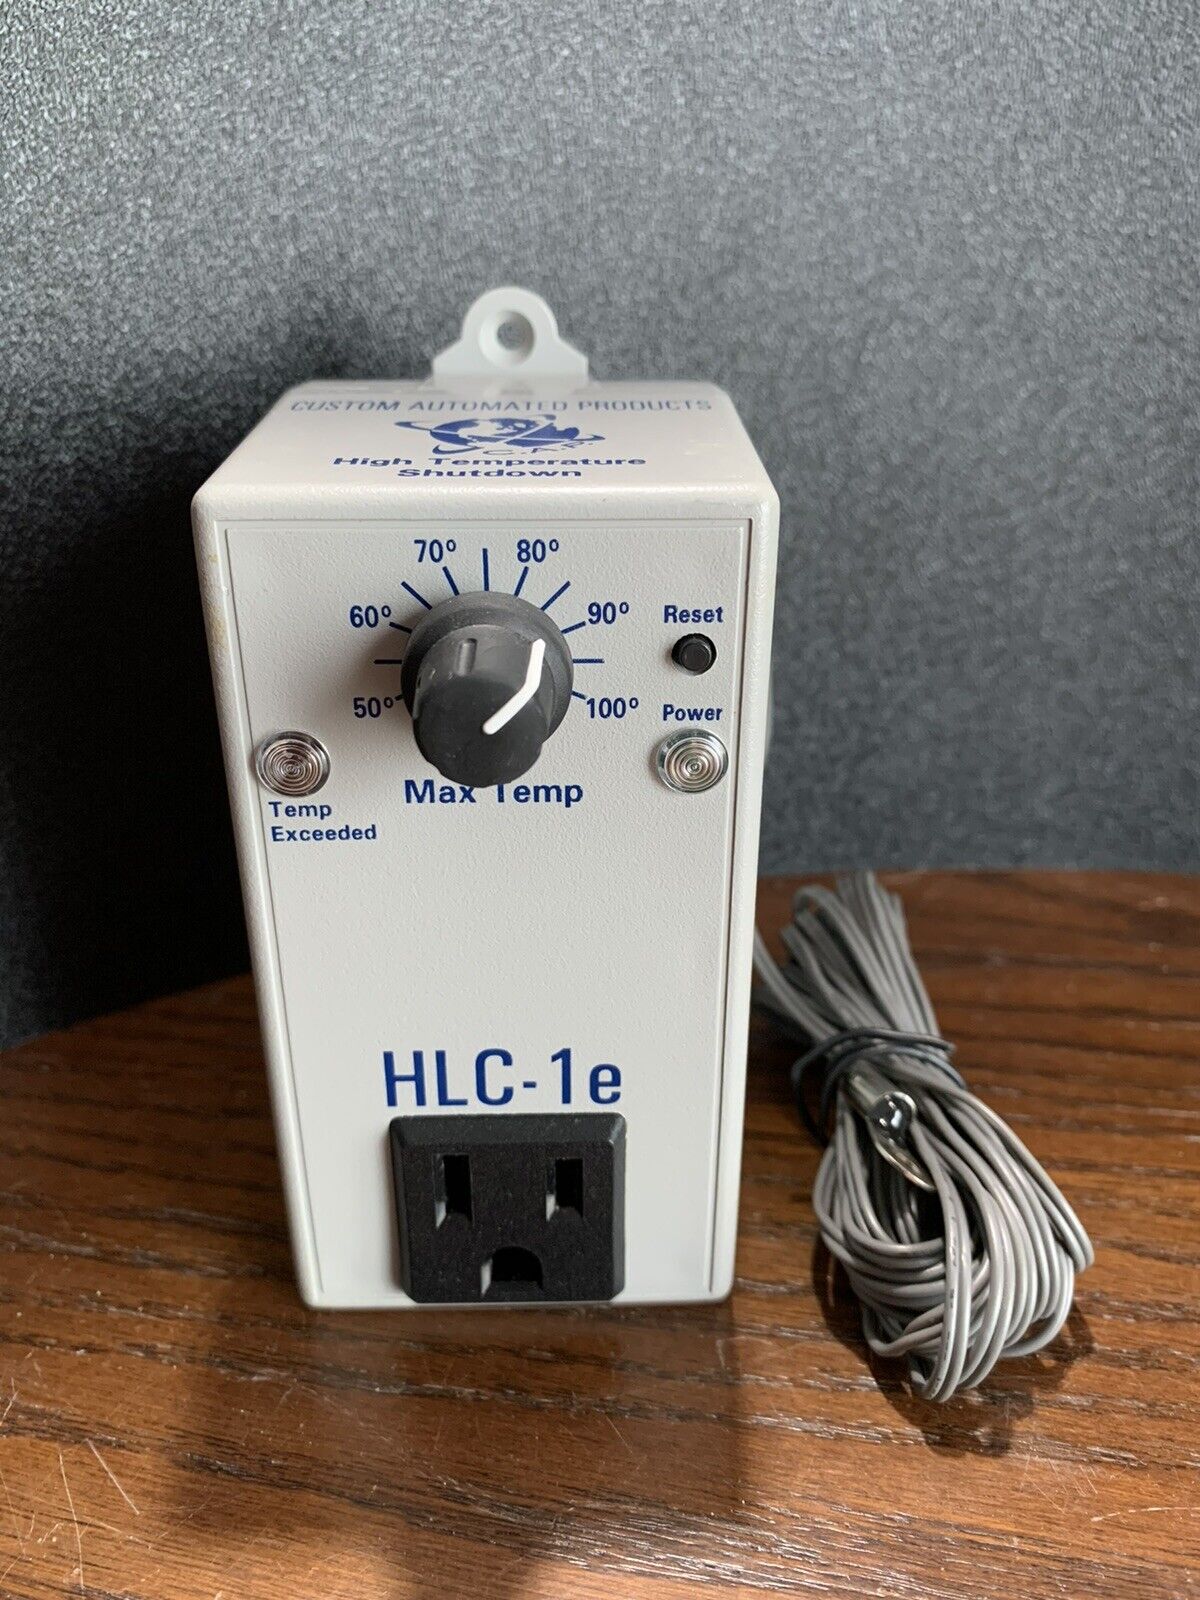 CAP HLC-1e High Temp HID Light Shut Off and Heating Thermostat - No Box